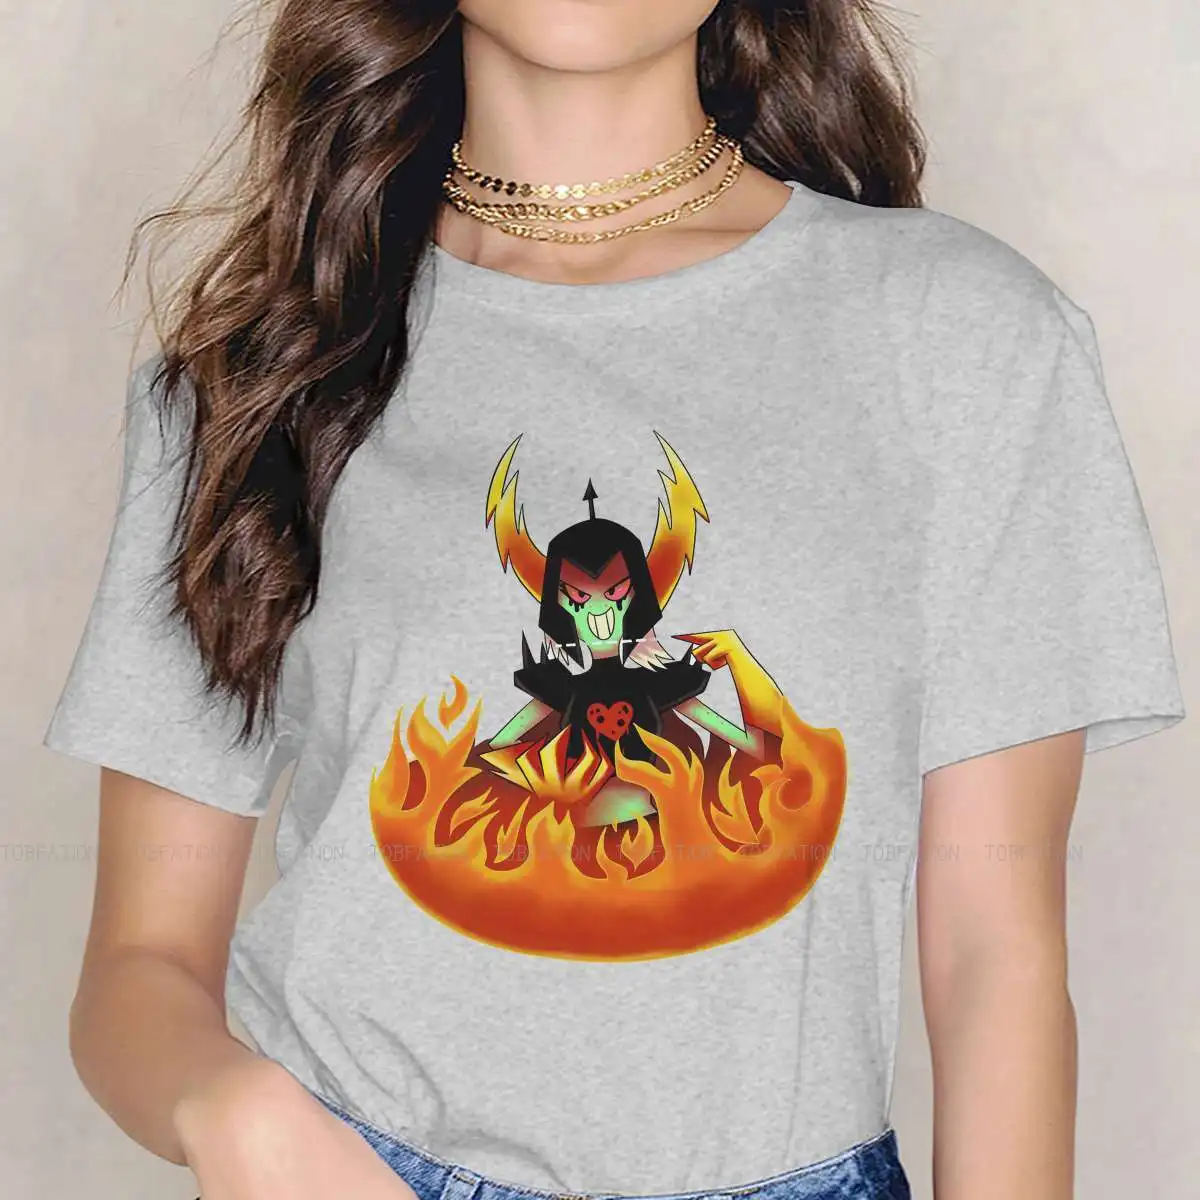 

Lord Dominator 5XL TShirt Wander Over Yonder Comic Adventure Animation Style Comfortable T Shirt Women Tee Special Gift Idea